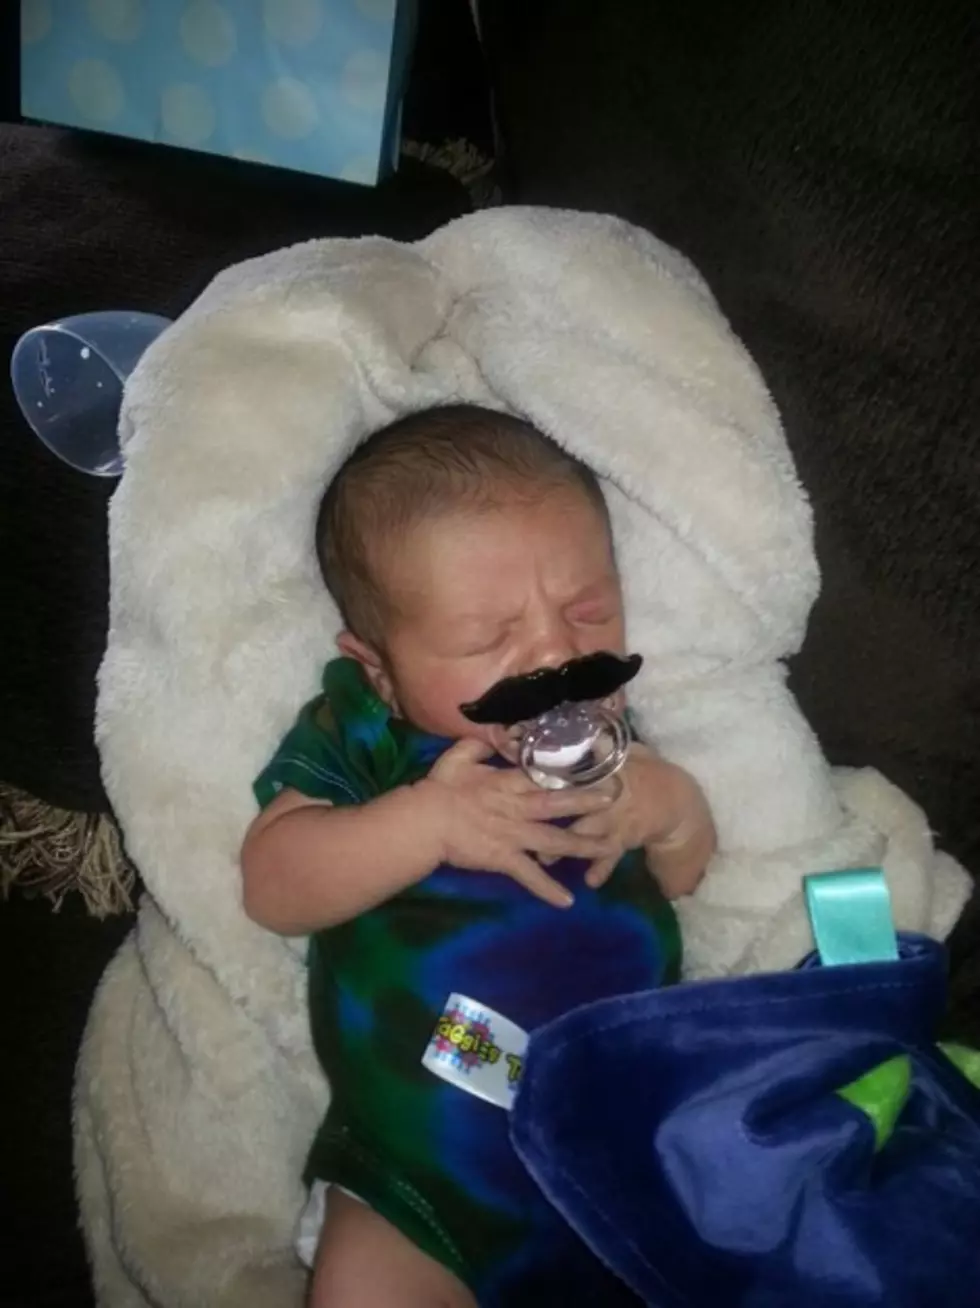 My Grandson&#8217;s First Mustache And Other Fun Photos &#8211; Brian&#8217;s Blog [PICTURES]